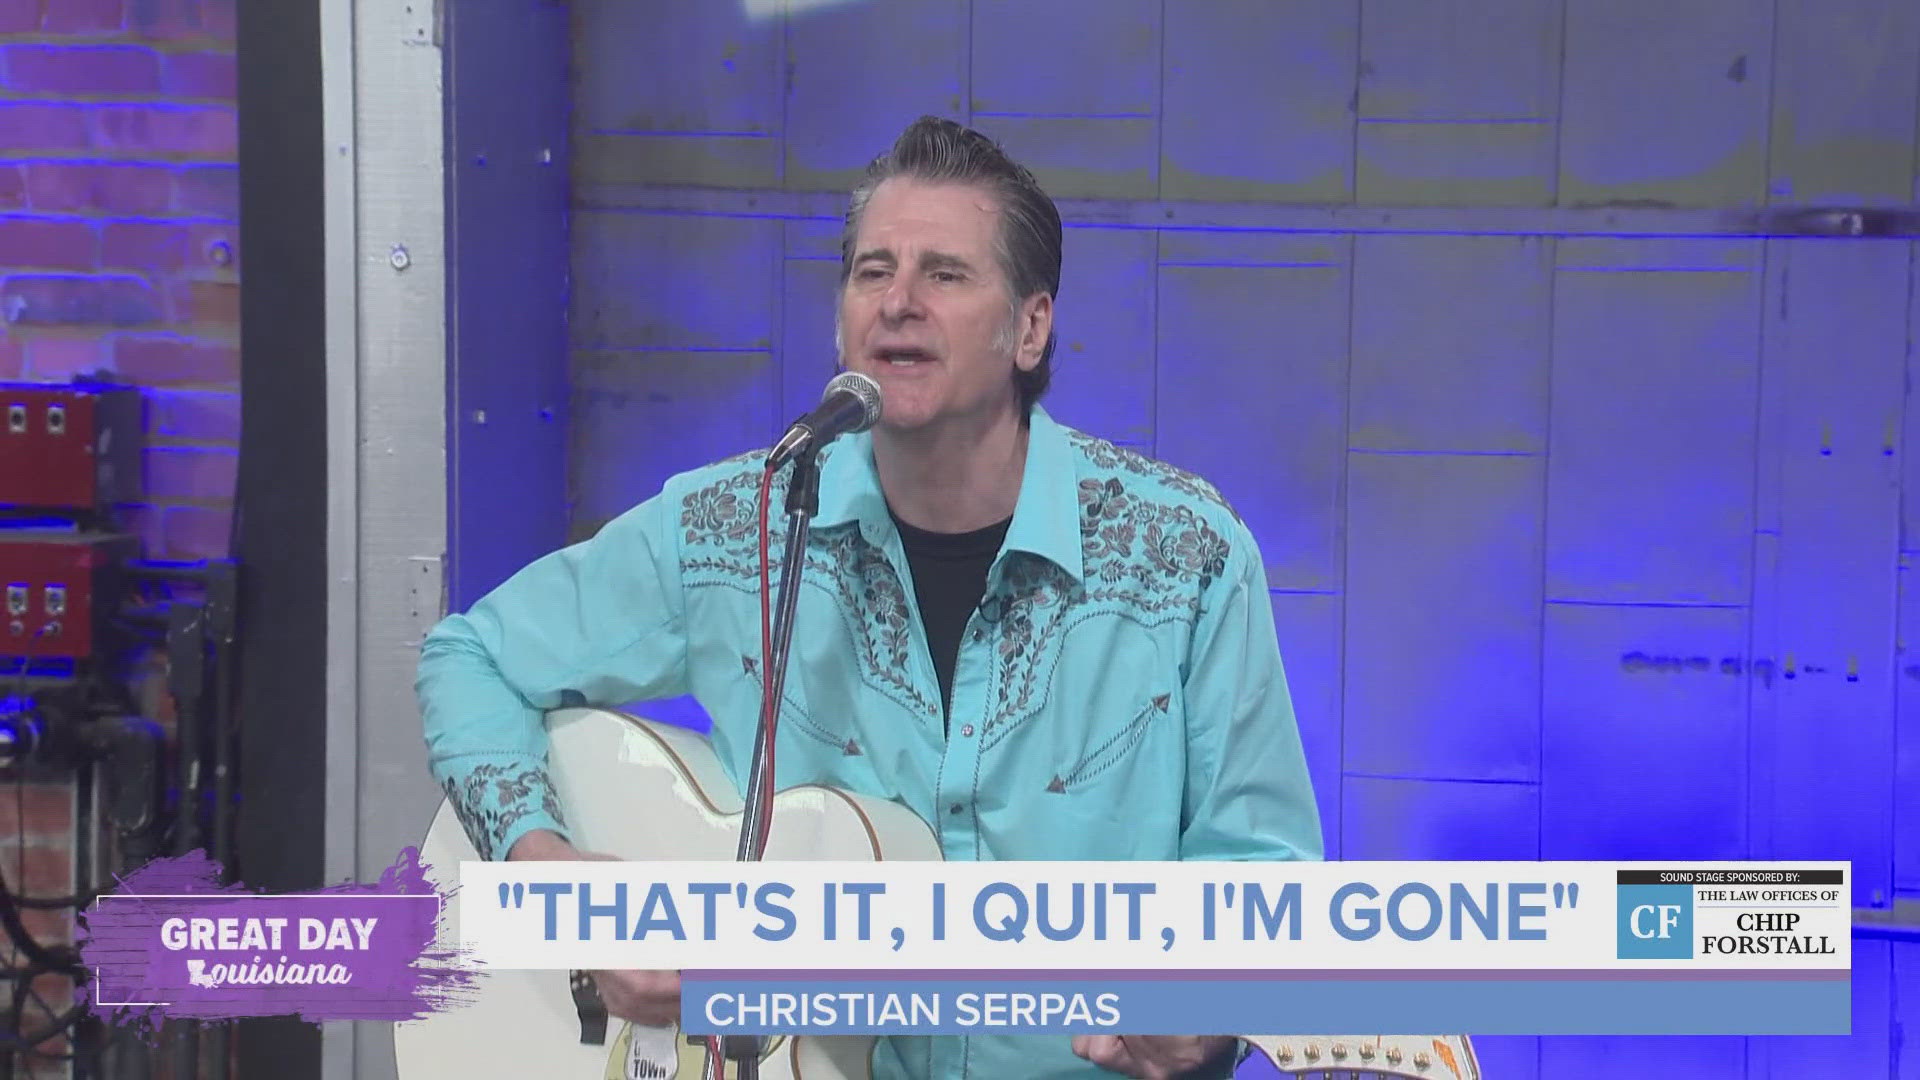 We enjoy another song from Christian Serpas of Ghost Town in our Chip Forstall Sound Stage.